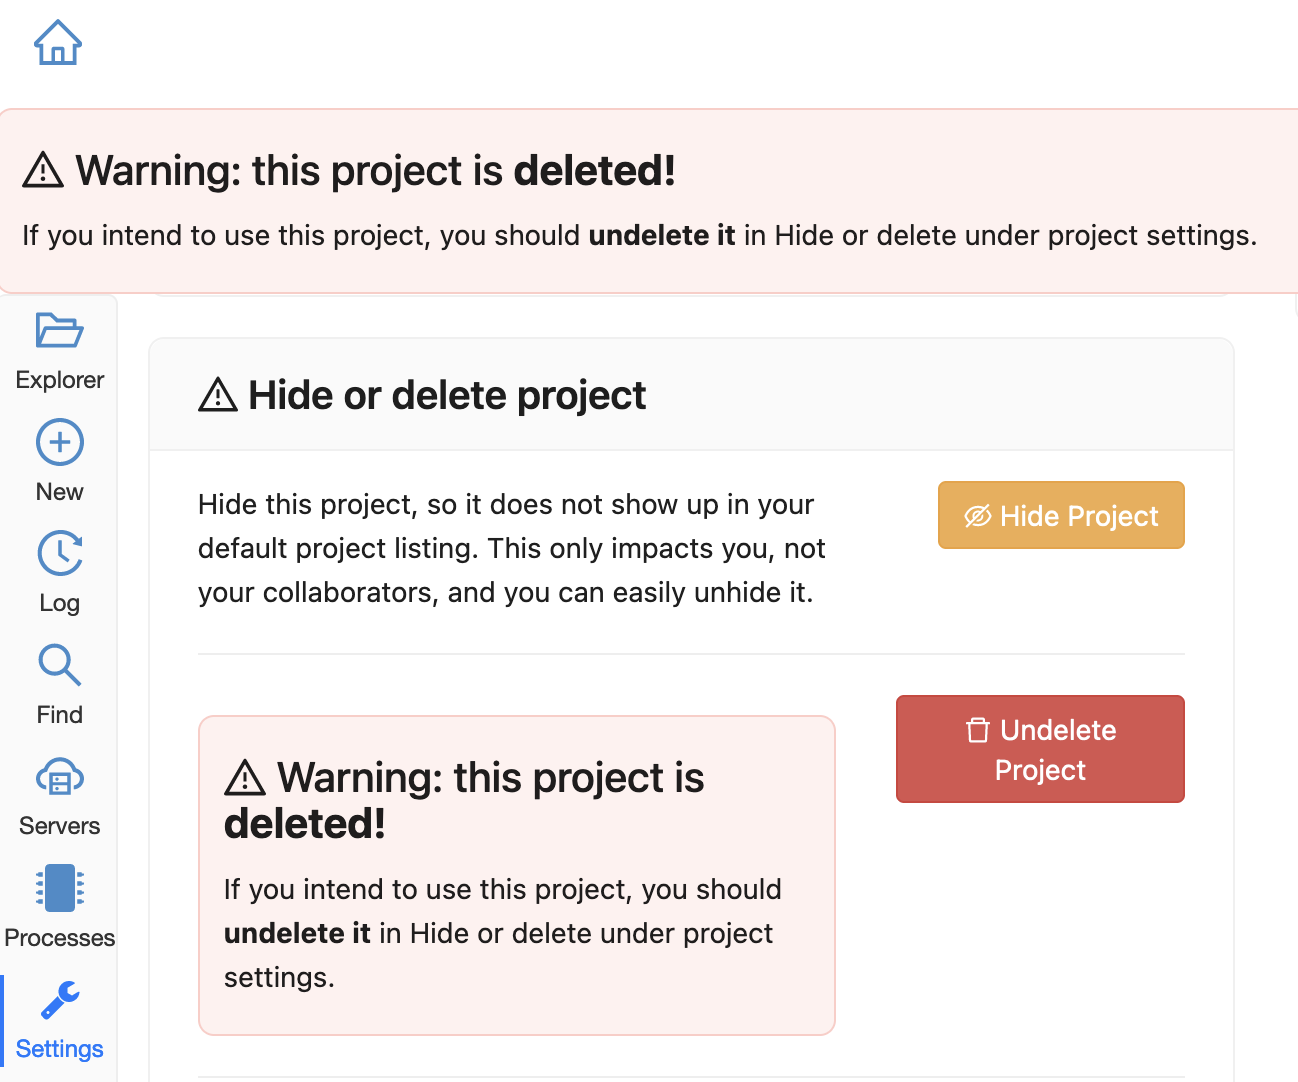 confirmation box saying project is deleted